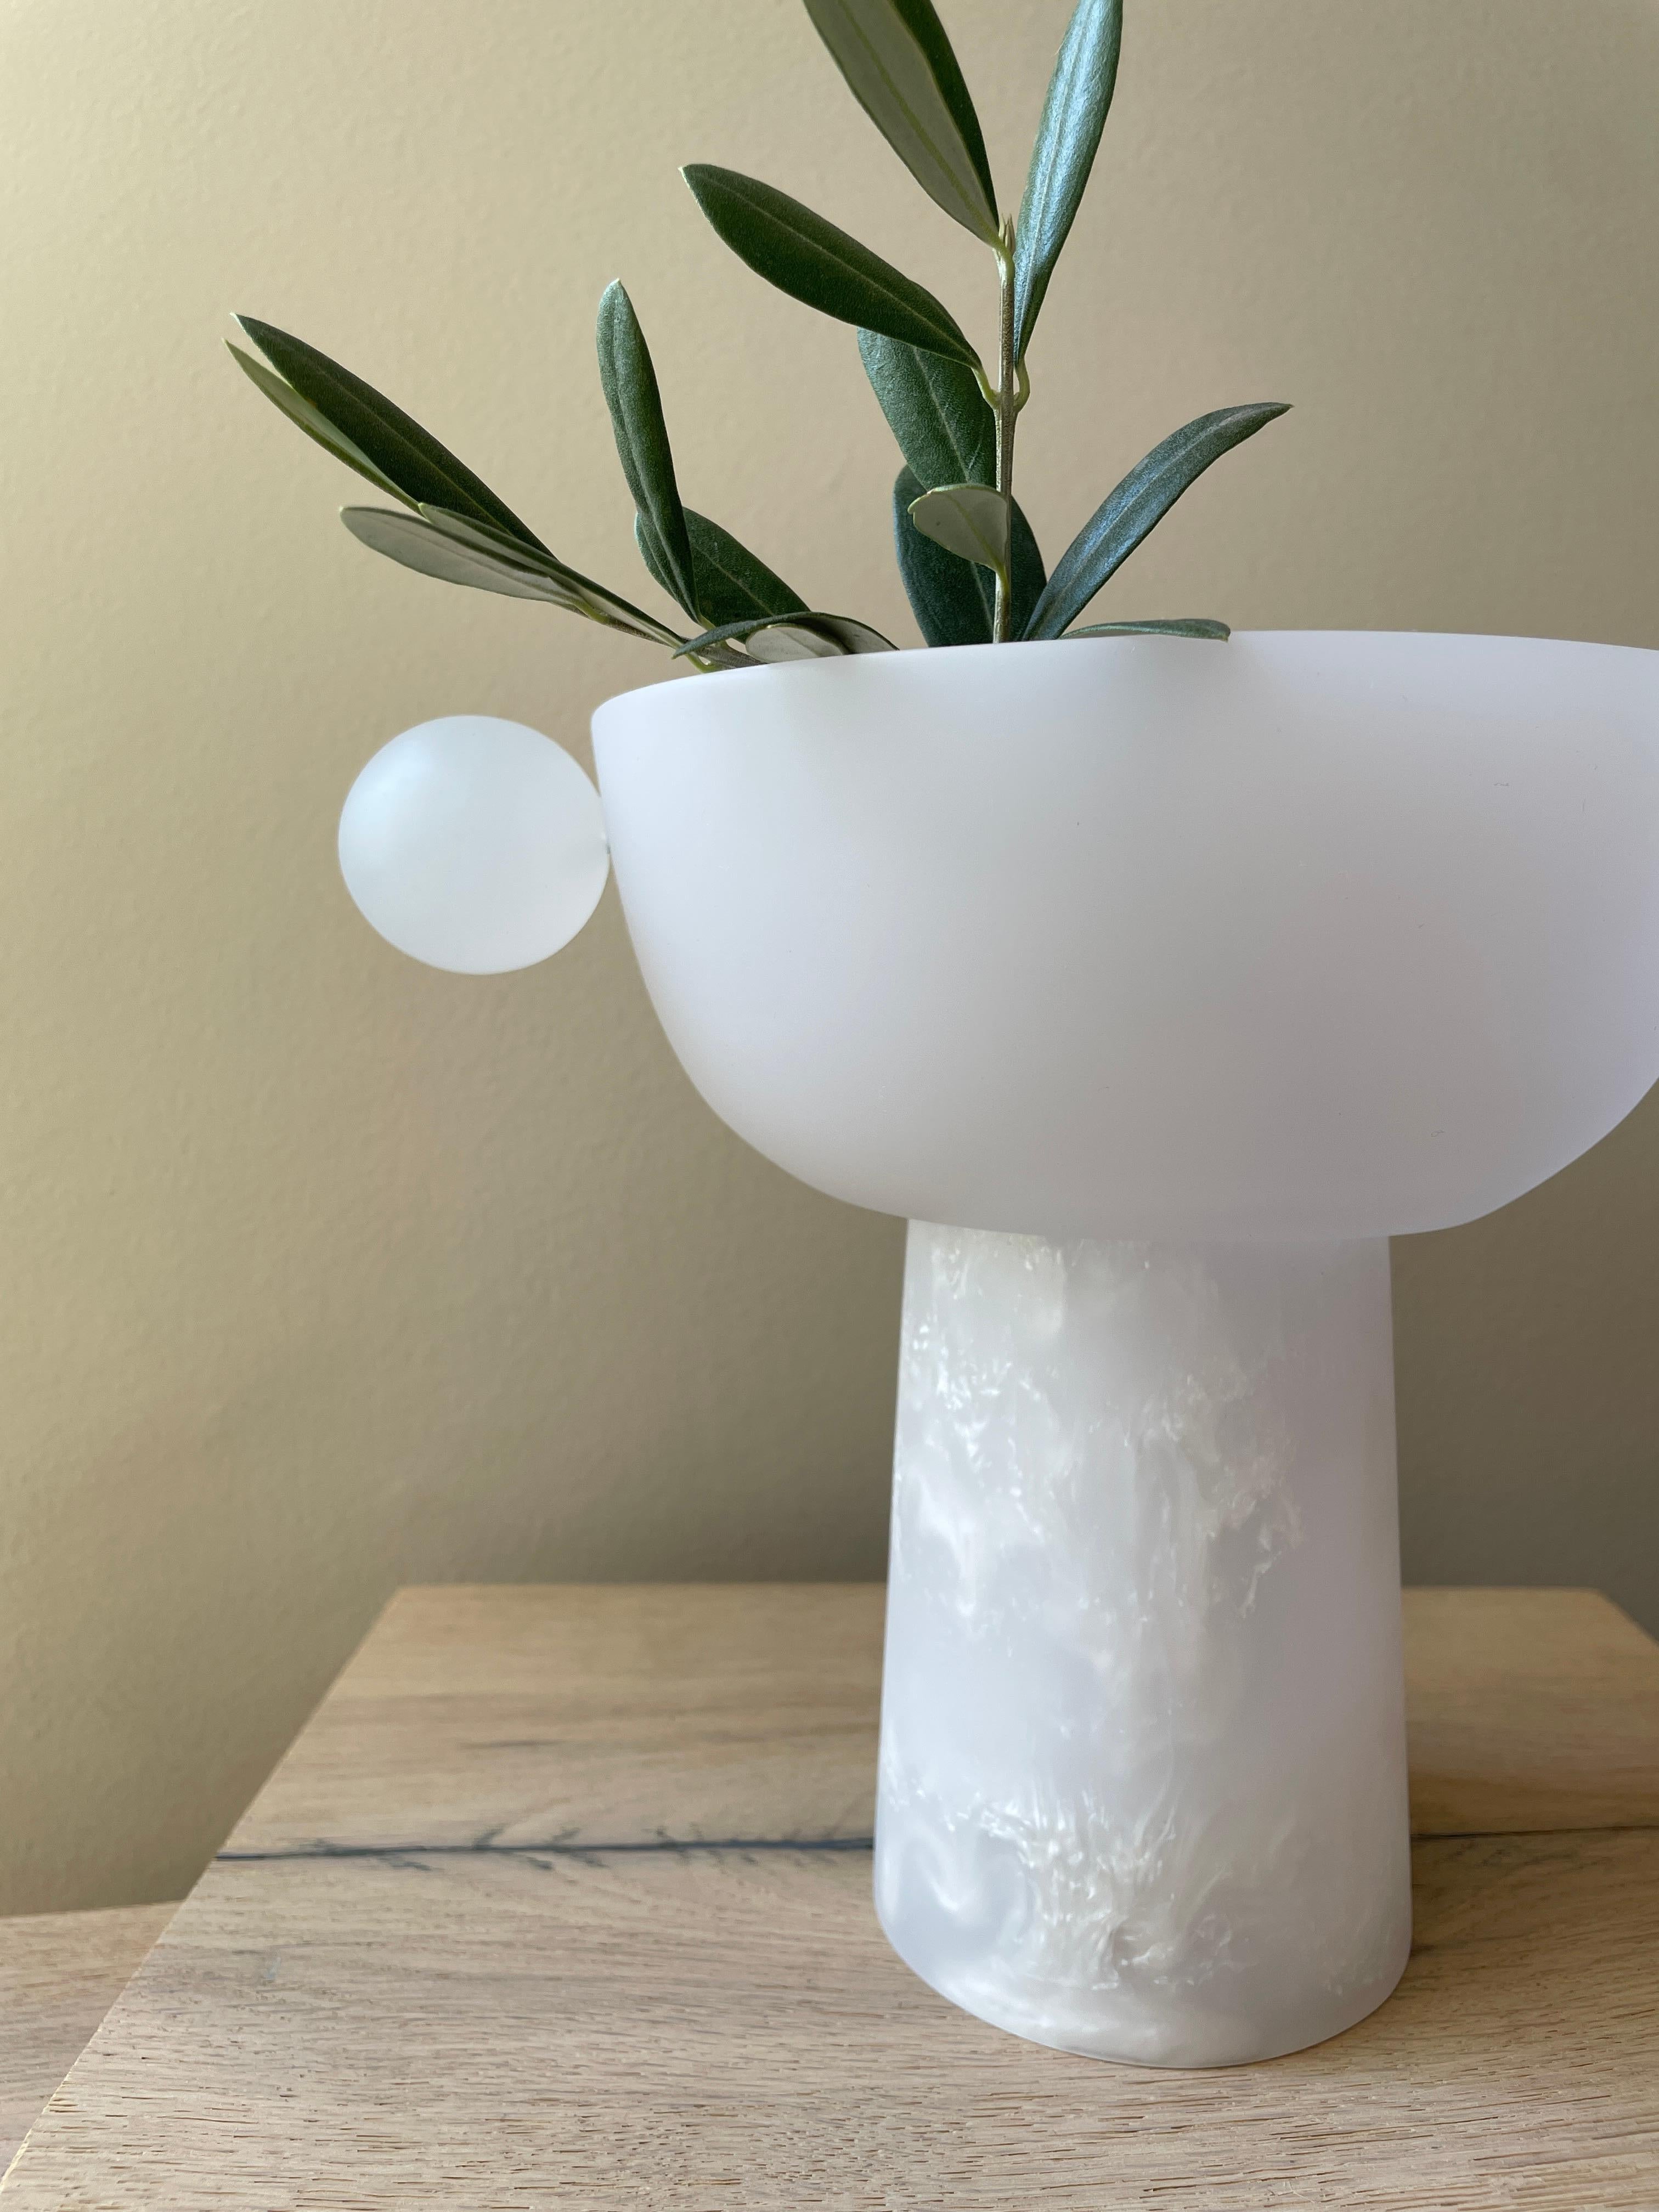 This small pedestal stands tall as a stately centerpiece or bookshelf display. The spheres give the piece a playful and modern look, making it a perfect statement piece for any space.

Bowl and spheres: Traslucid white resin in satin